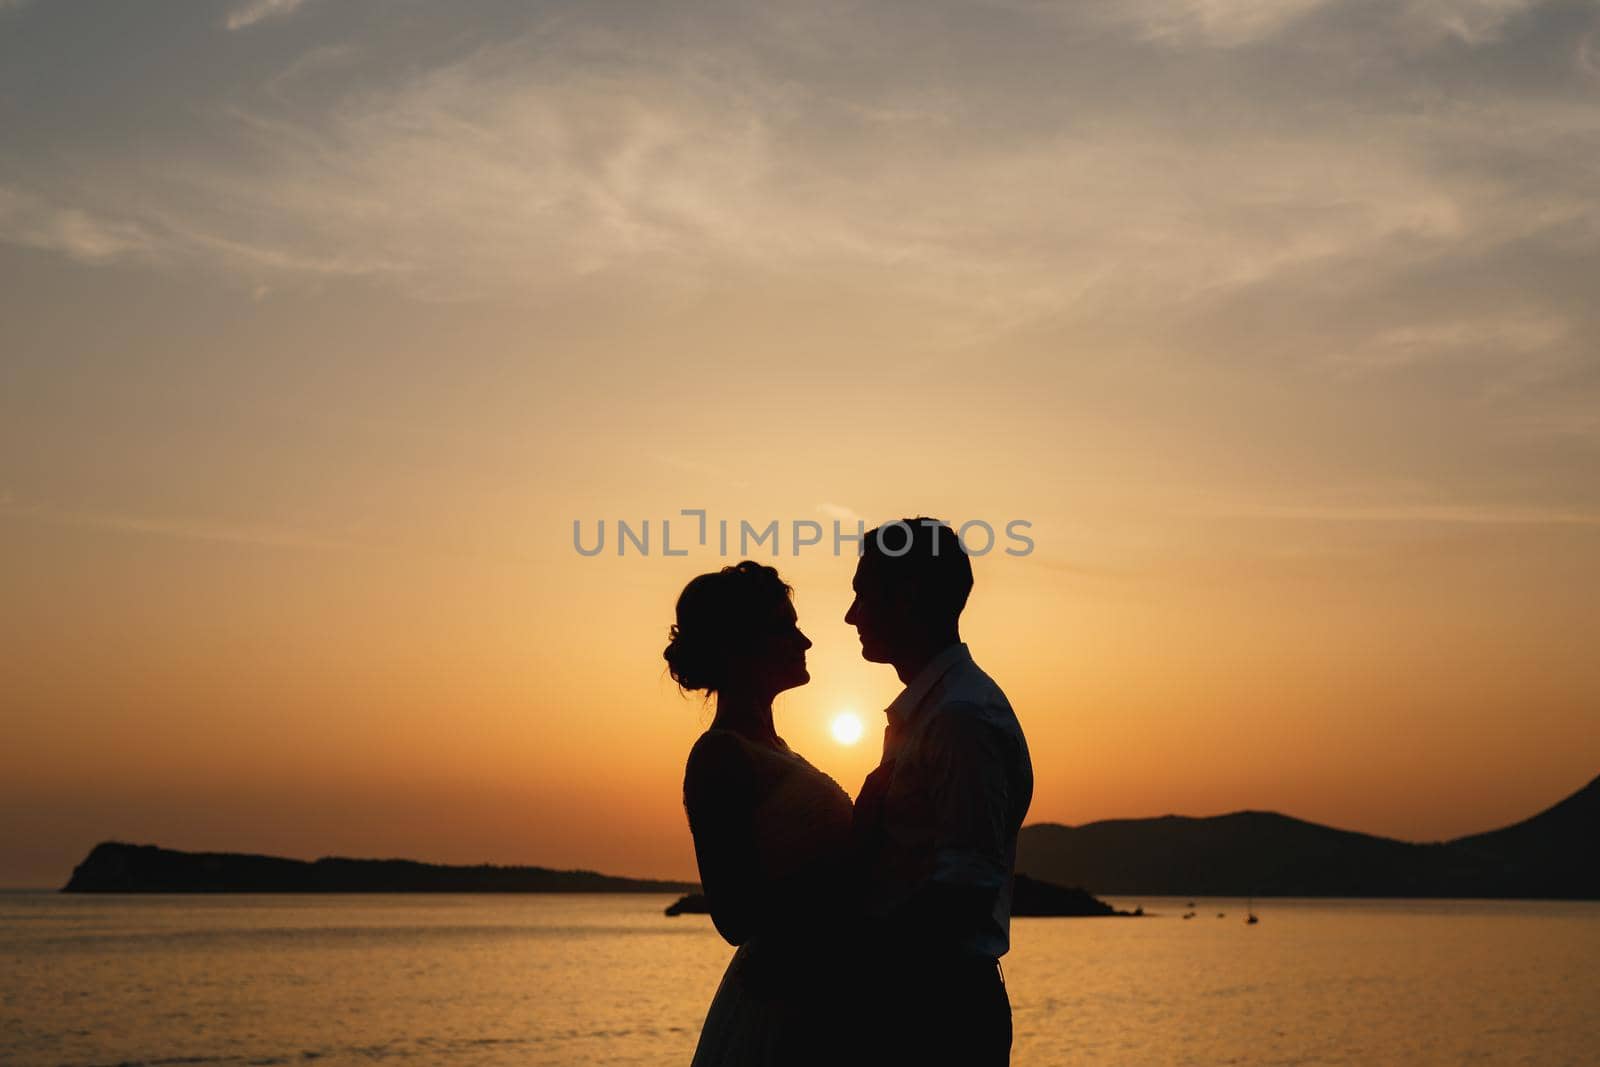 The bride and groom are embracing on the seashore at sunset and look at each other . High quality photo